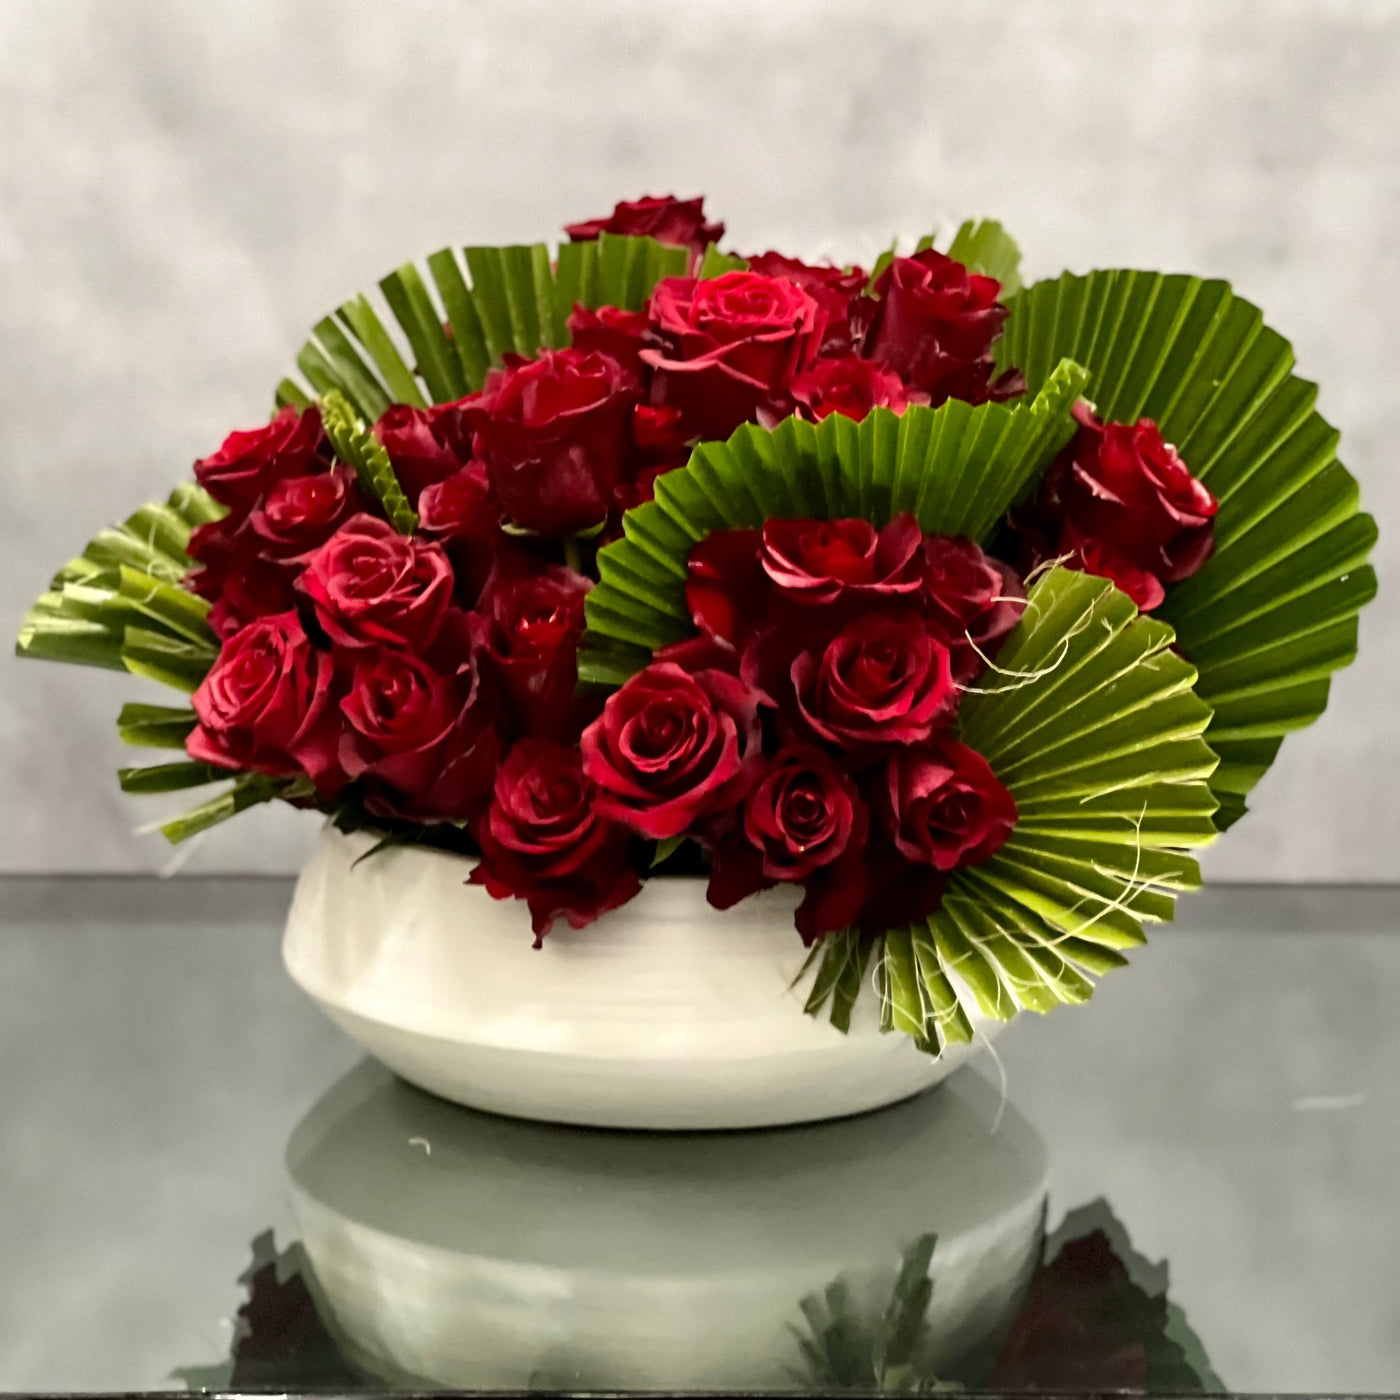 Beverly Hills Florist presents this Rich arrangement for same day delivery! A romantic and lovely deep red Roses create a stunning and abundant design. The perfect floral design for love and romance, thinking of you and anniversary. 